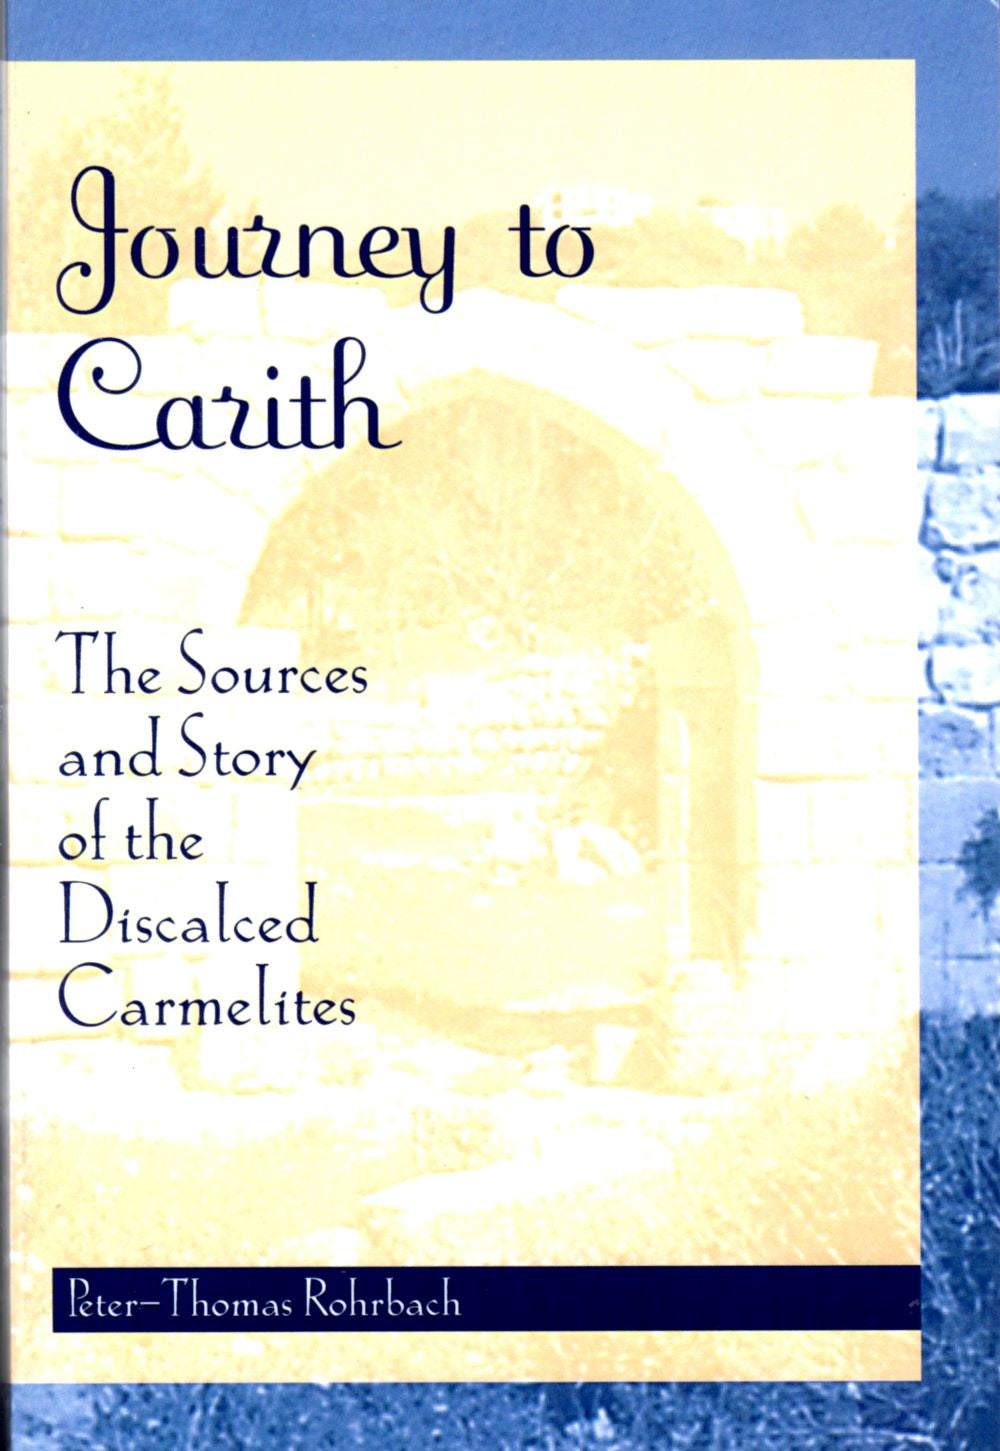 JOURNEY TO CARITH (1966)